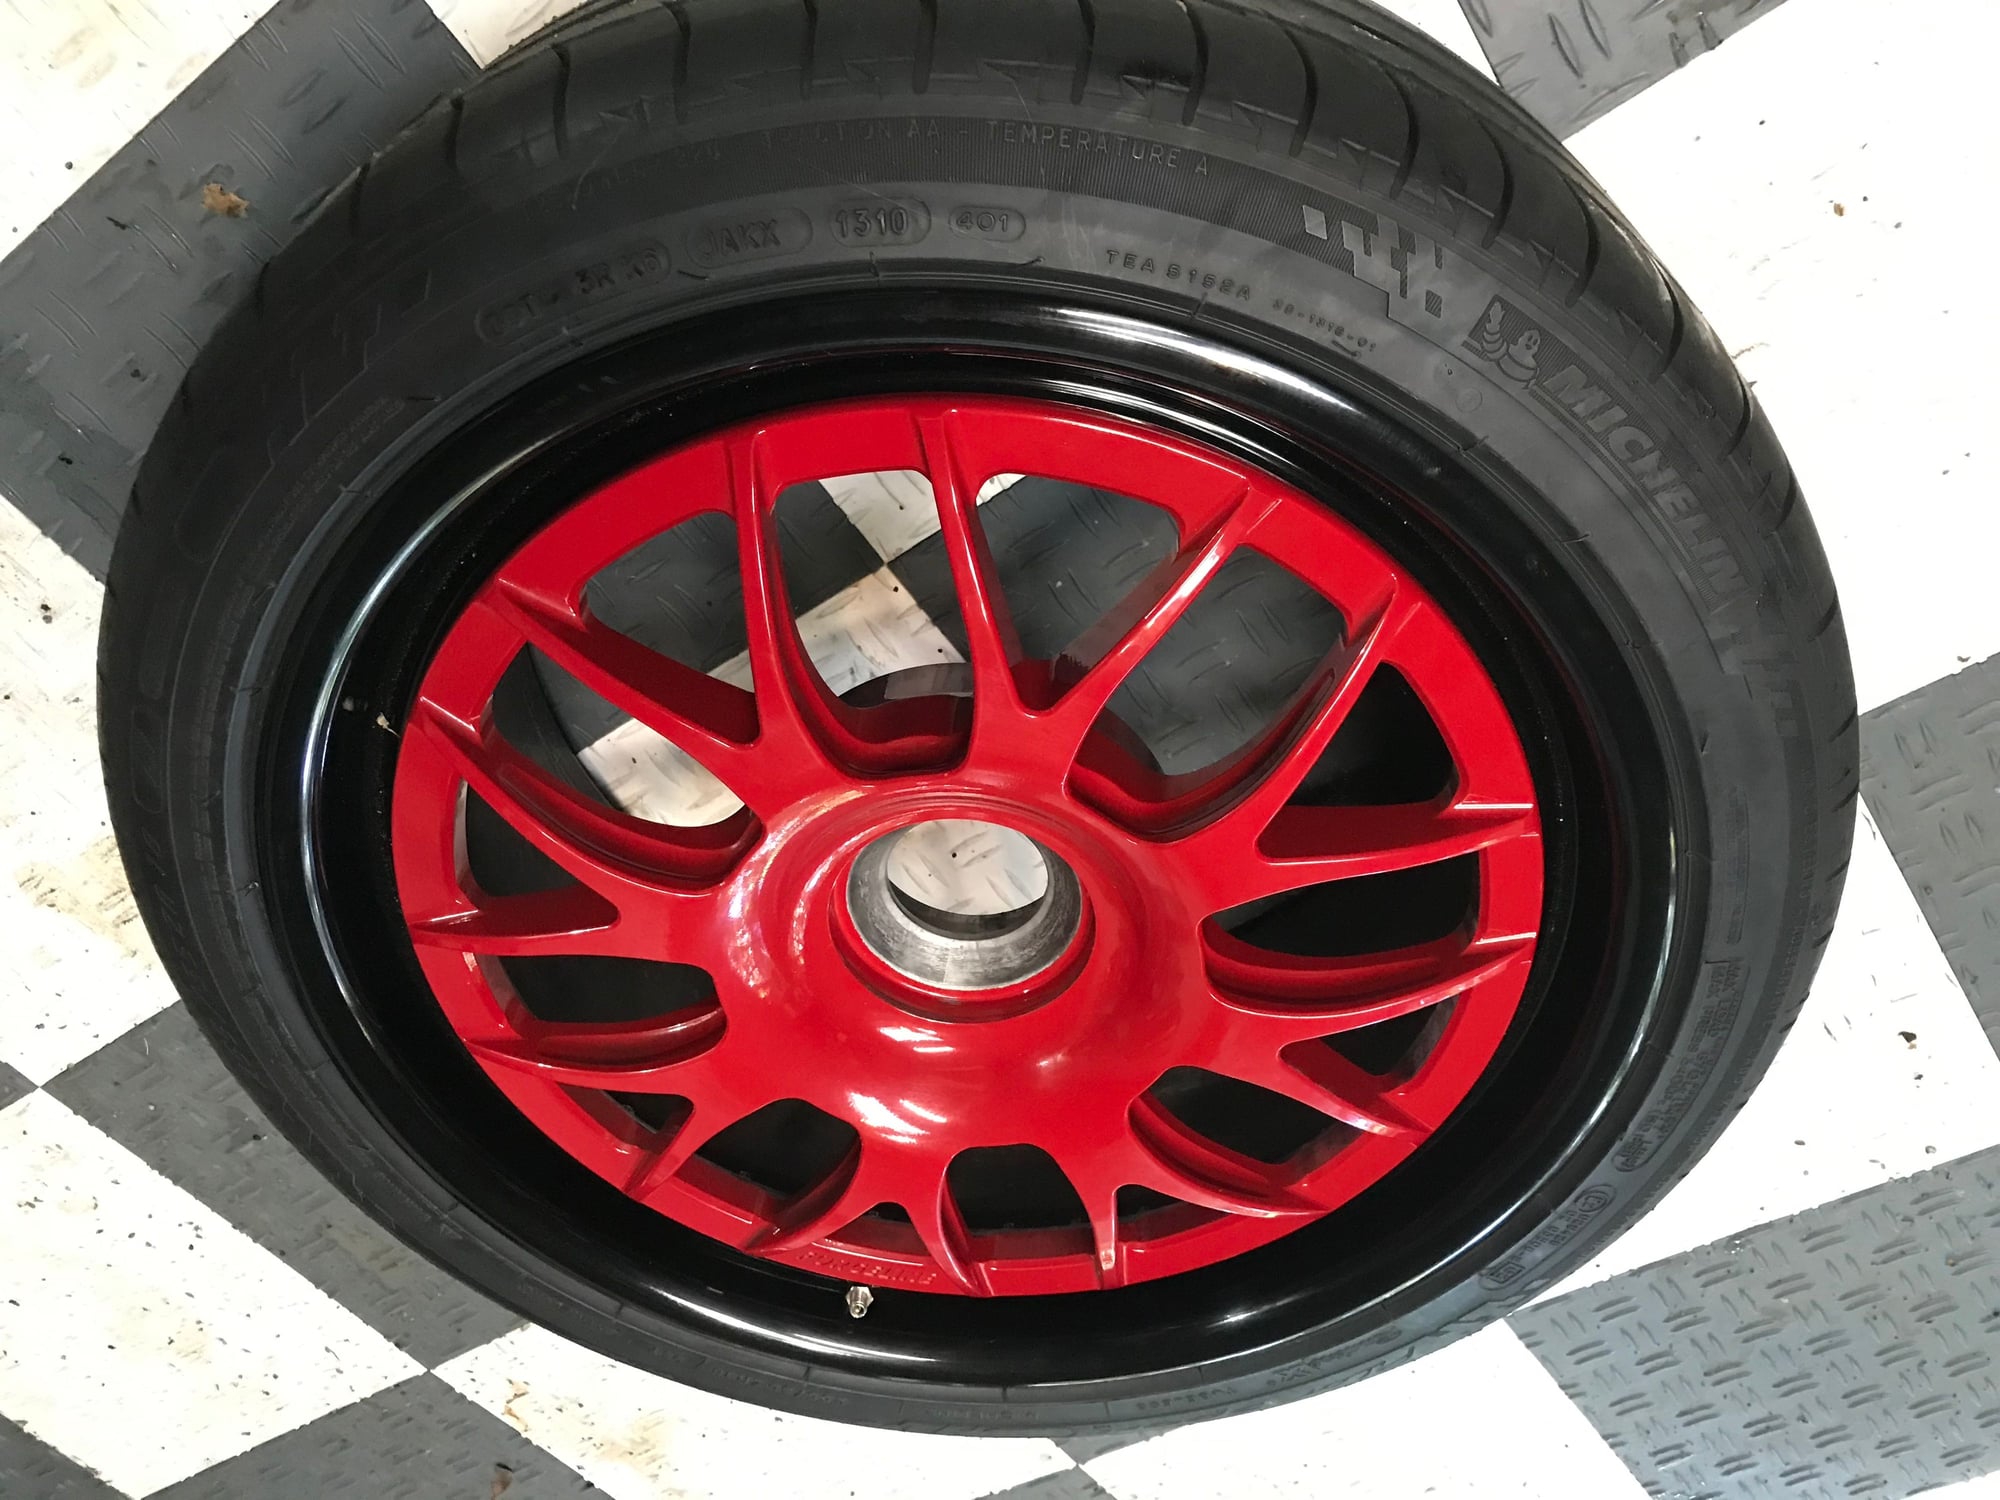 Wheels and Tires/Axles - 997.2 GT3 RS Forgeline GA3C Wheels 18" in Guards Red clears PCCBs - Used - 2010 to 2012 Porsche GT3 - San Francisco, CA 94109, United States